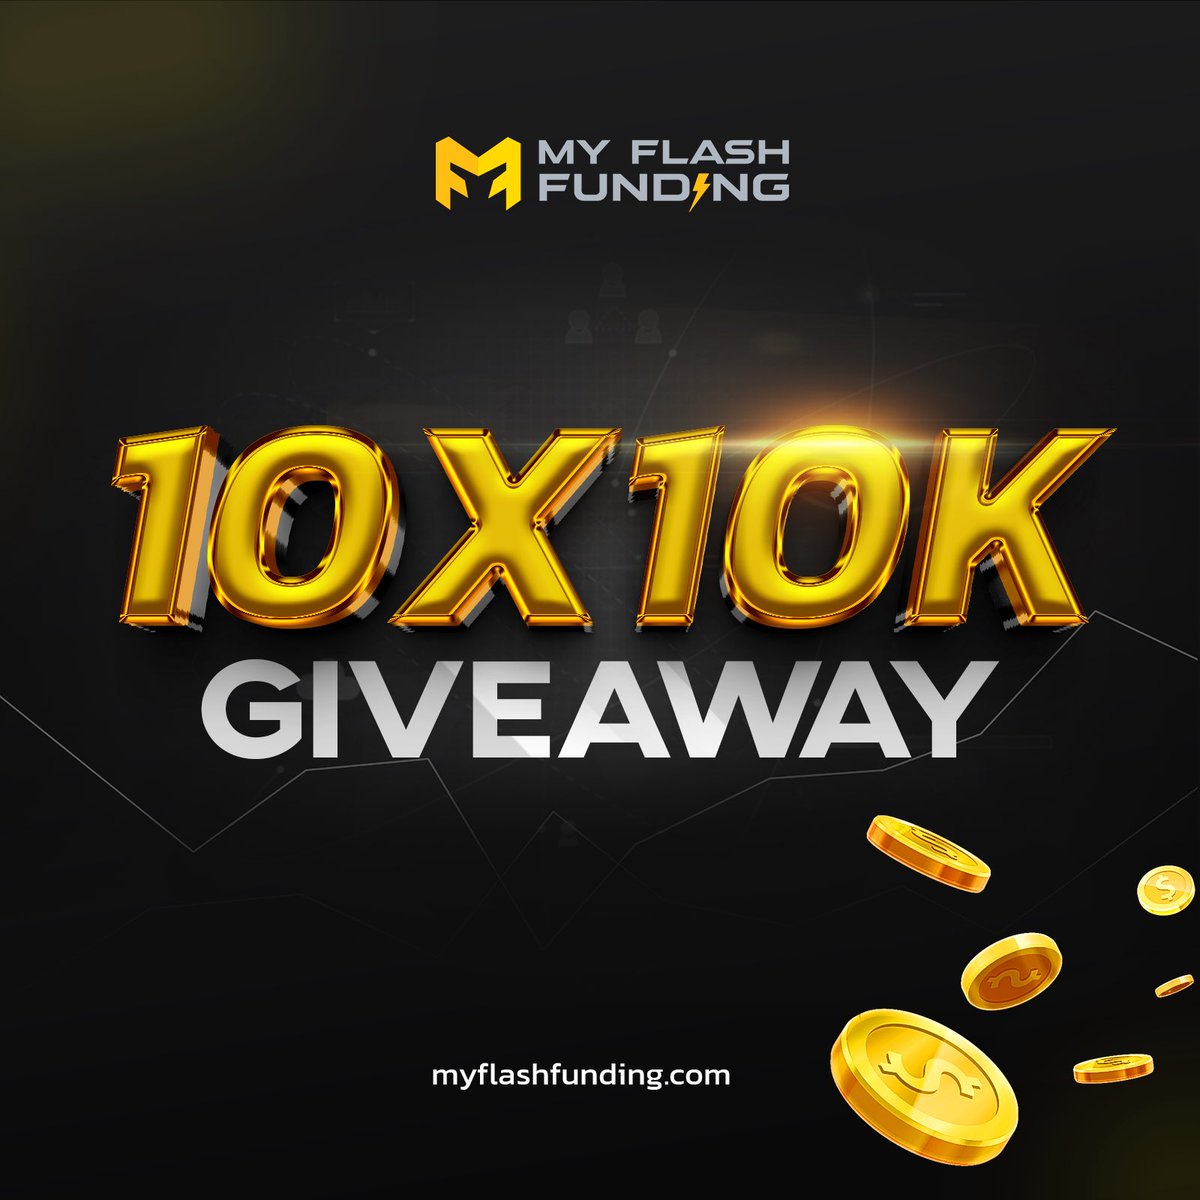 10x 10K challenge ACCT. GIVEAWAY 

To win:🏆 

1. Follow @midrizzy1,  @myflashfunding , @blakemyff 

2. Follow @CommyofPhc , @Techriztm , @DrPeey 

3. Like/RT post & pinned tweet  

4. Tag 3 traders

📣Winners will be announced in 72 hours

Goodluck